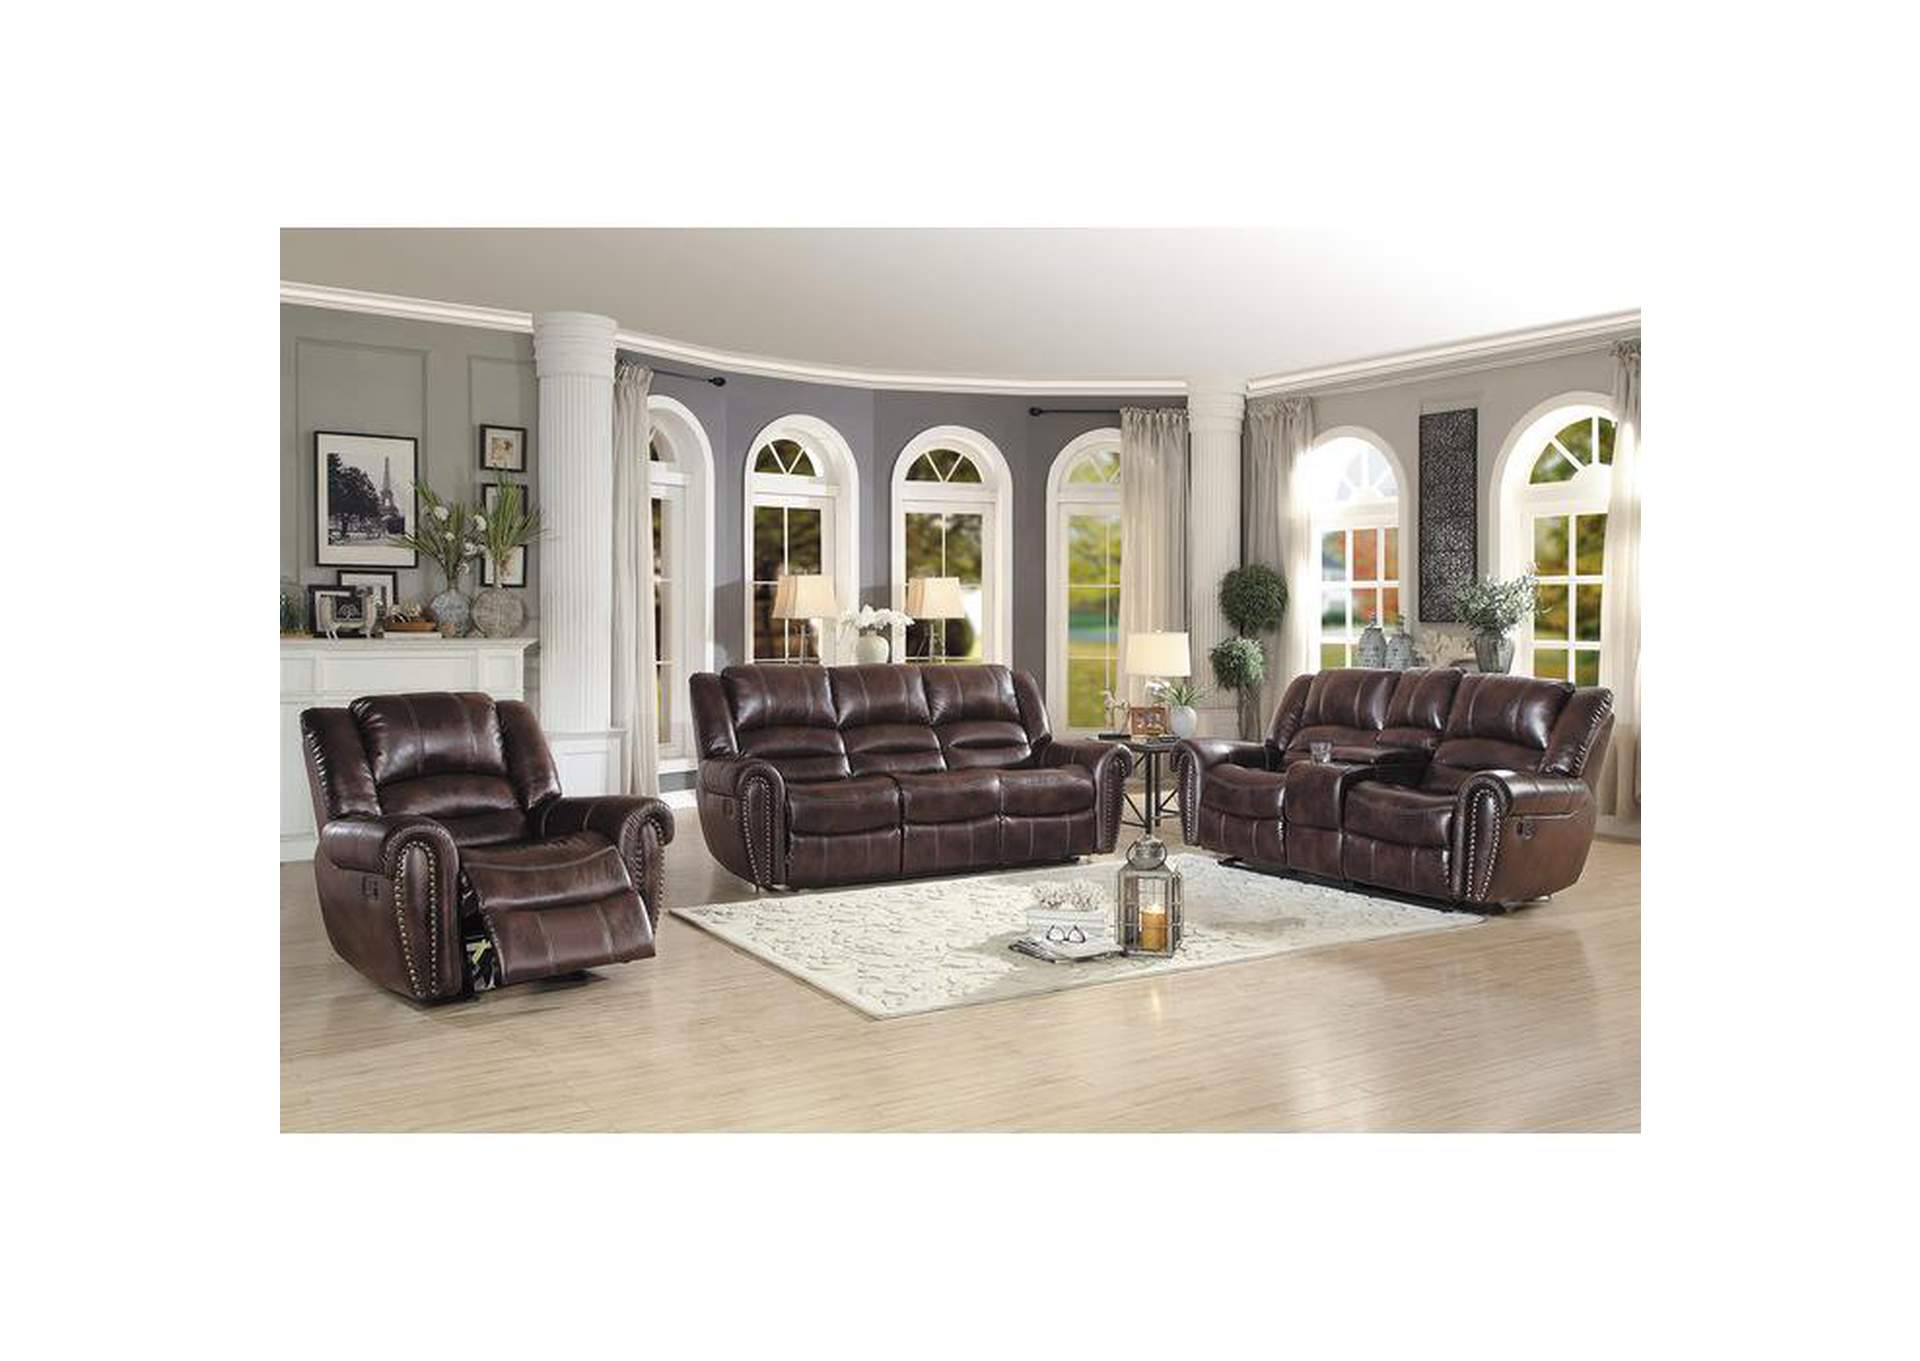 Hill Double Reclining Sofa,Homelegance